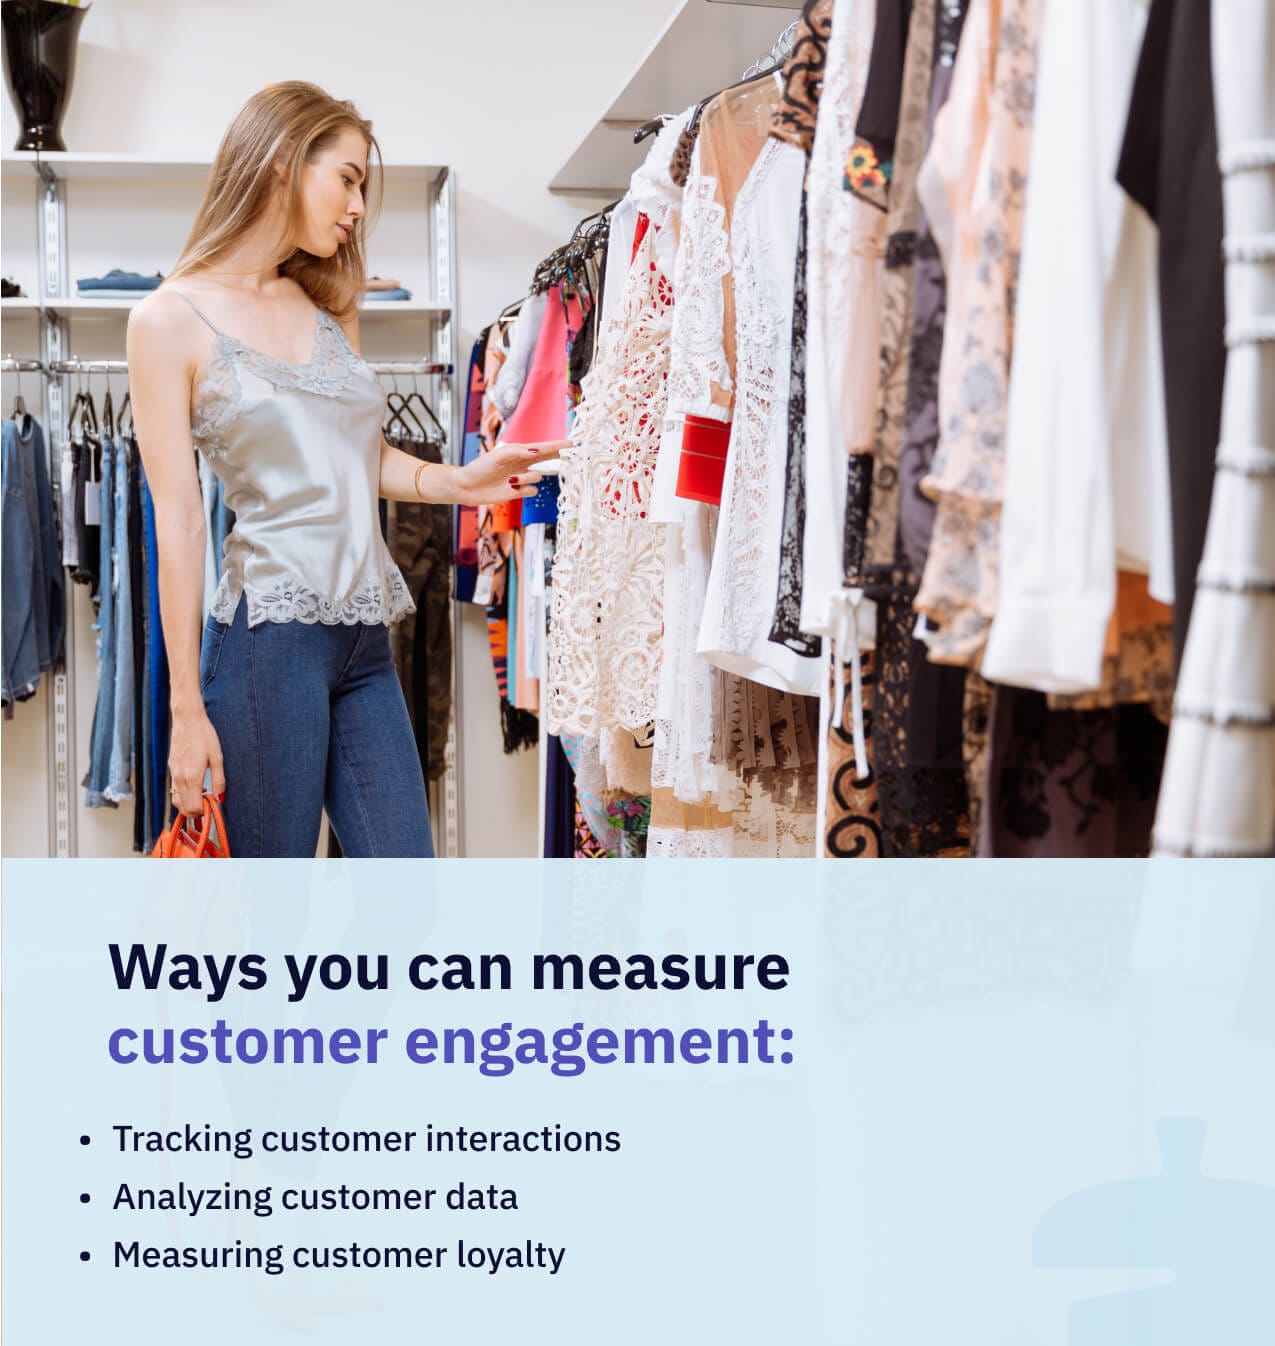 Measuring customer engagement with CRM software